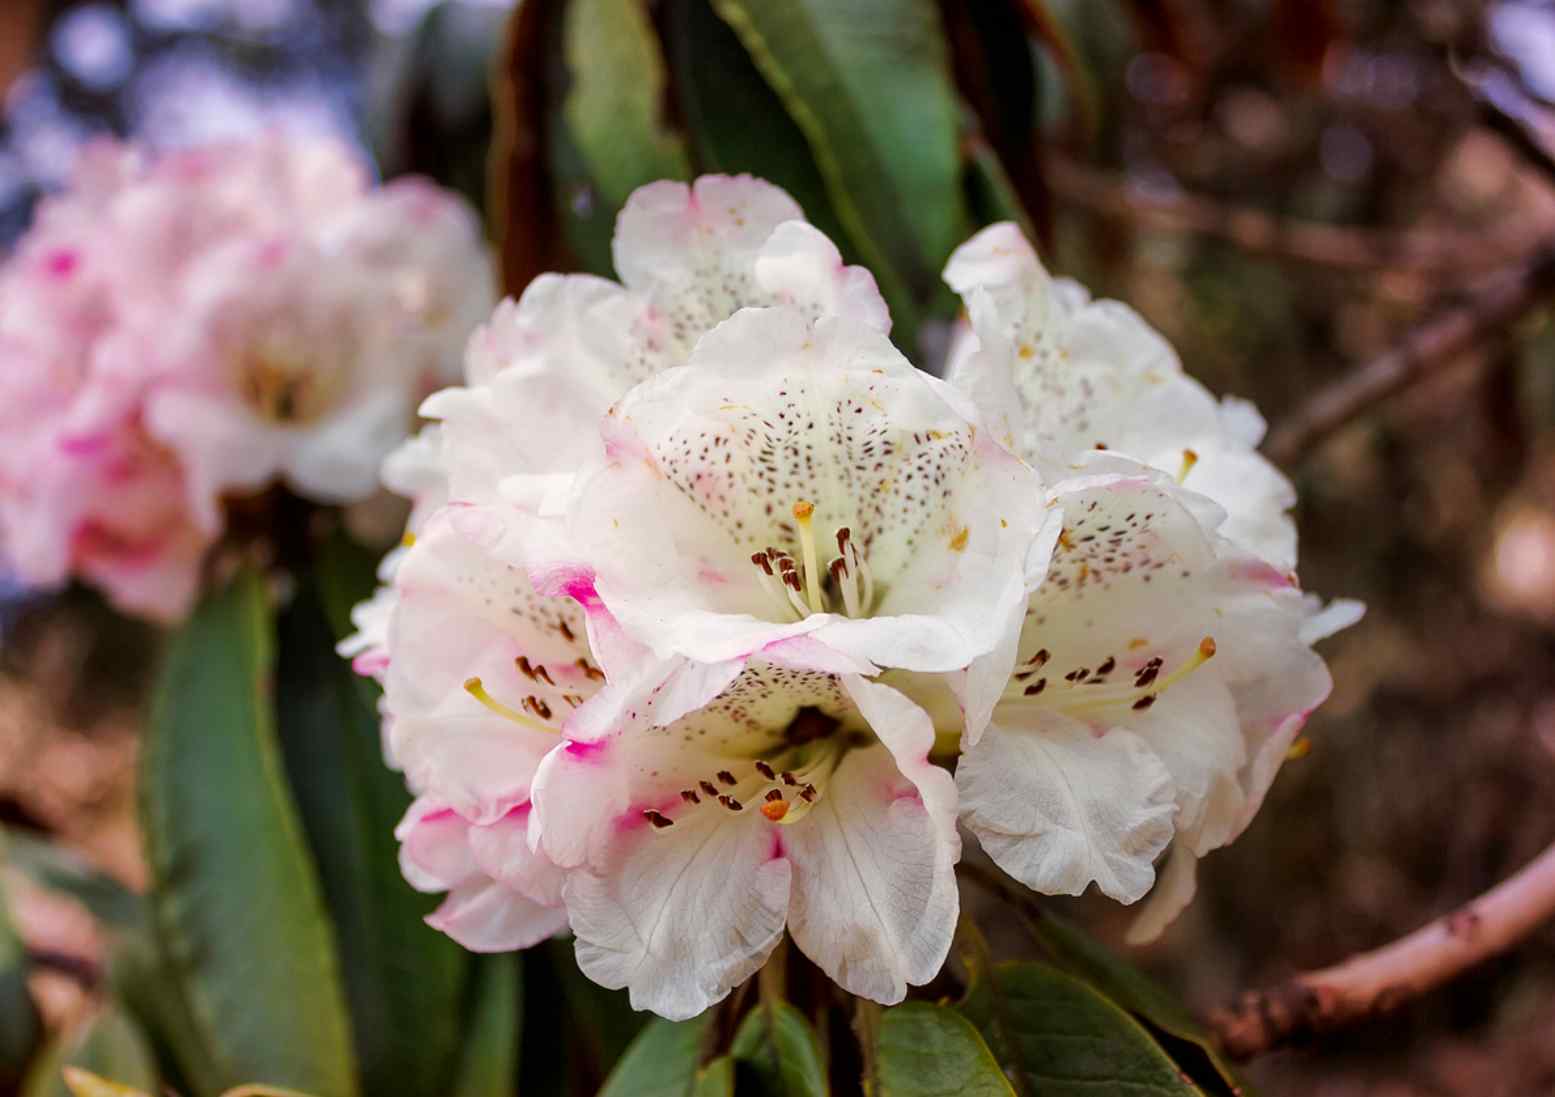 Rhododendron Anthopogon Essential Oil, derived from the pristine Himalayan region, offers a soothing and exotic aroma for a truly revitalizing aromatherapy experience.